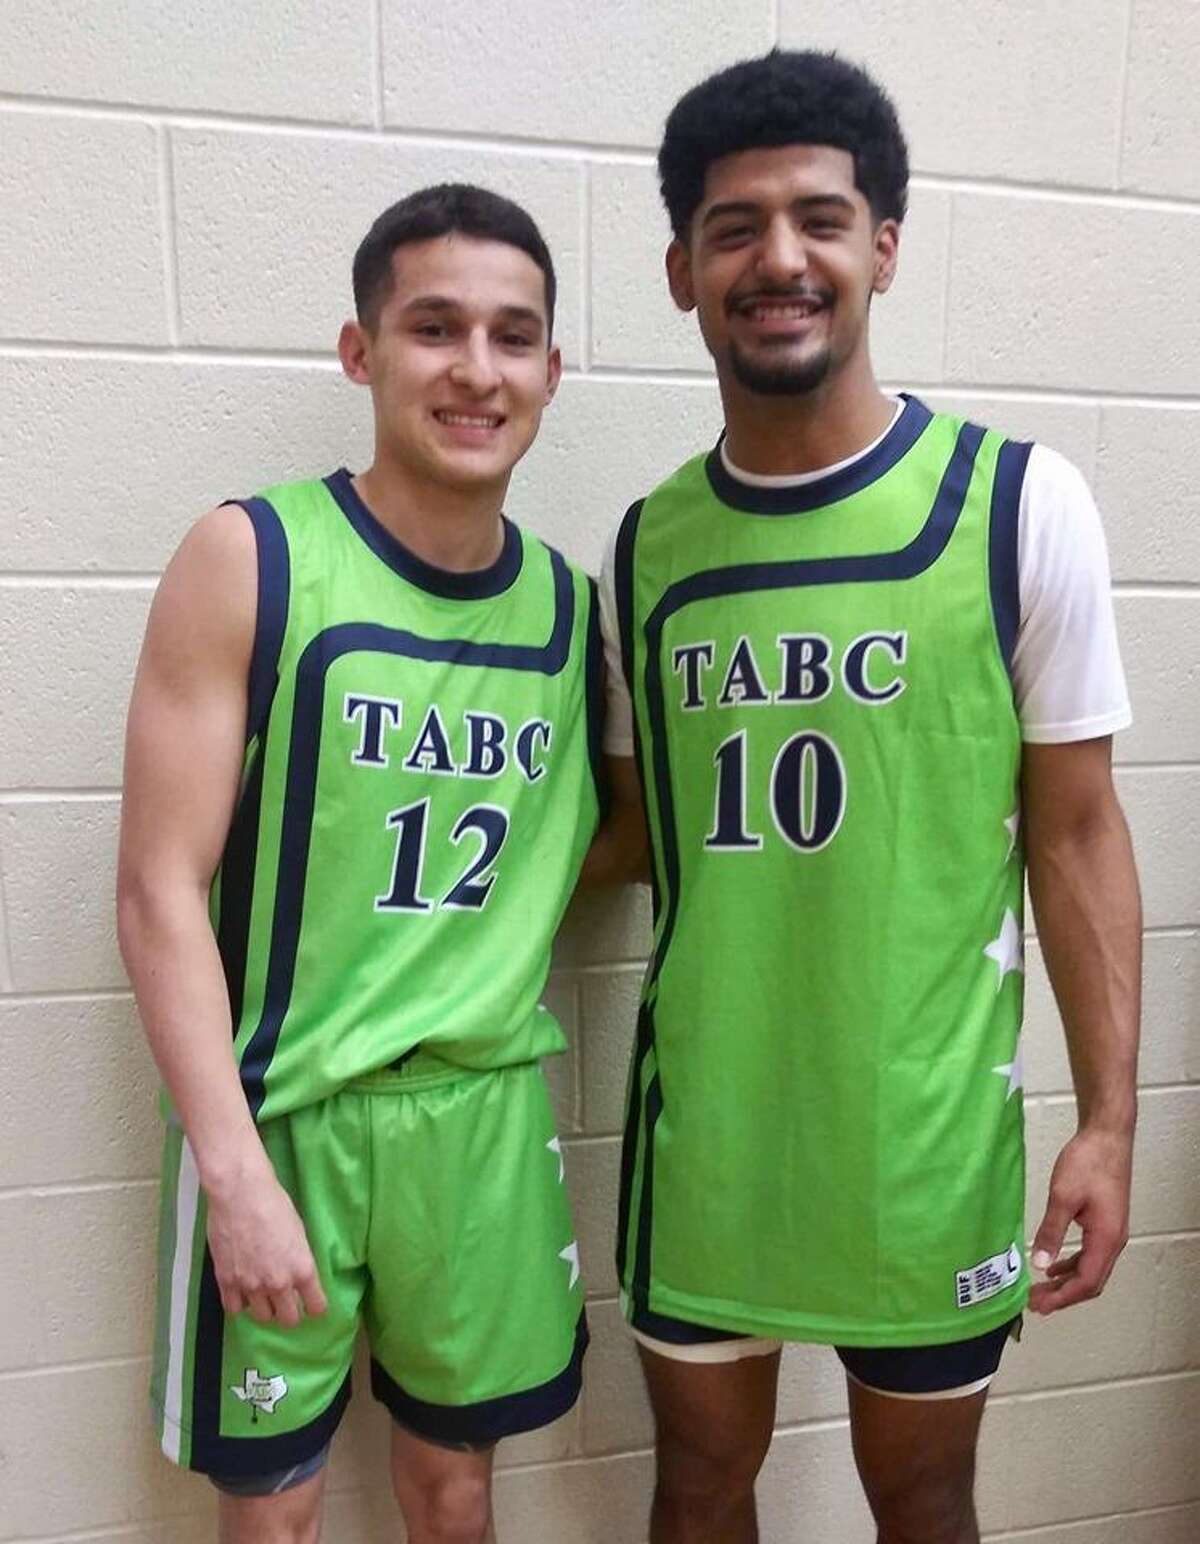 United’s Andy Pompa and Martin’s Mathew Duron closed out their high school careers together Friday in the TABC All-Star game in San Antonio. It was the first time Laredo had multiple representatives in the same season.